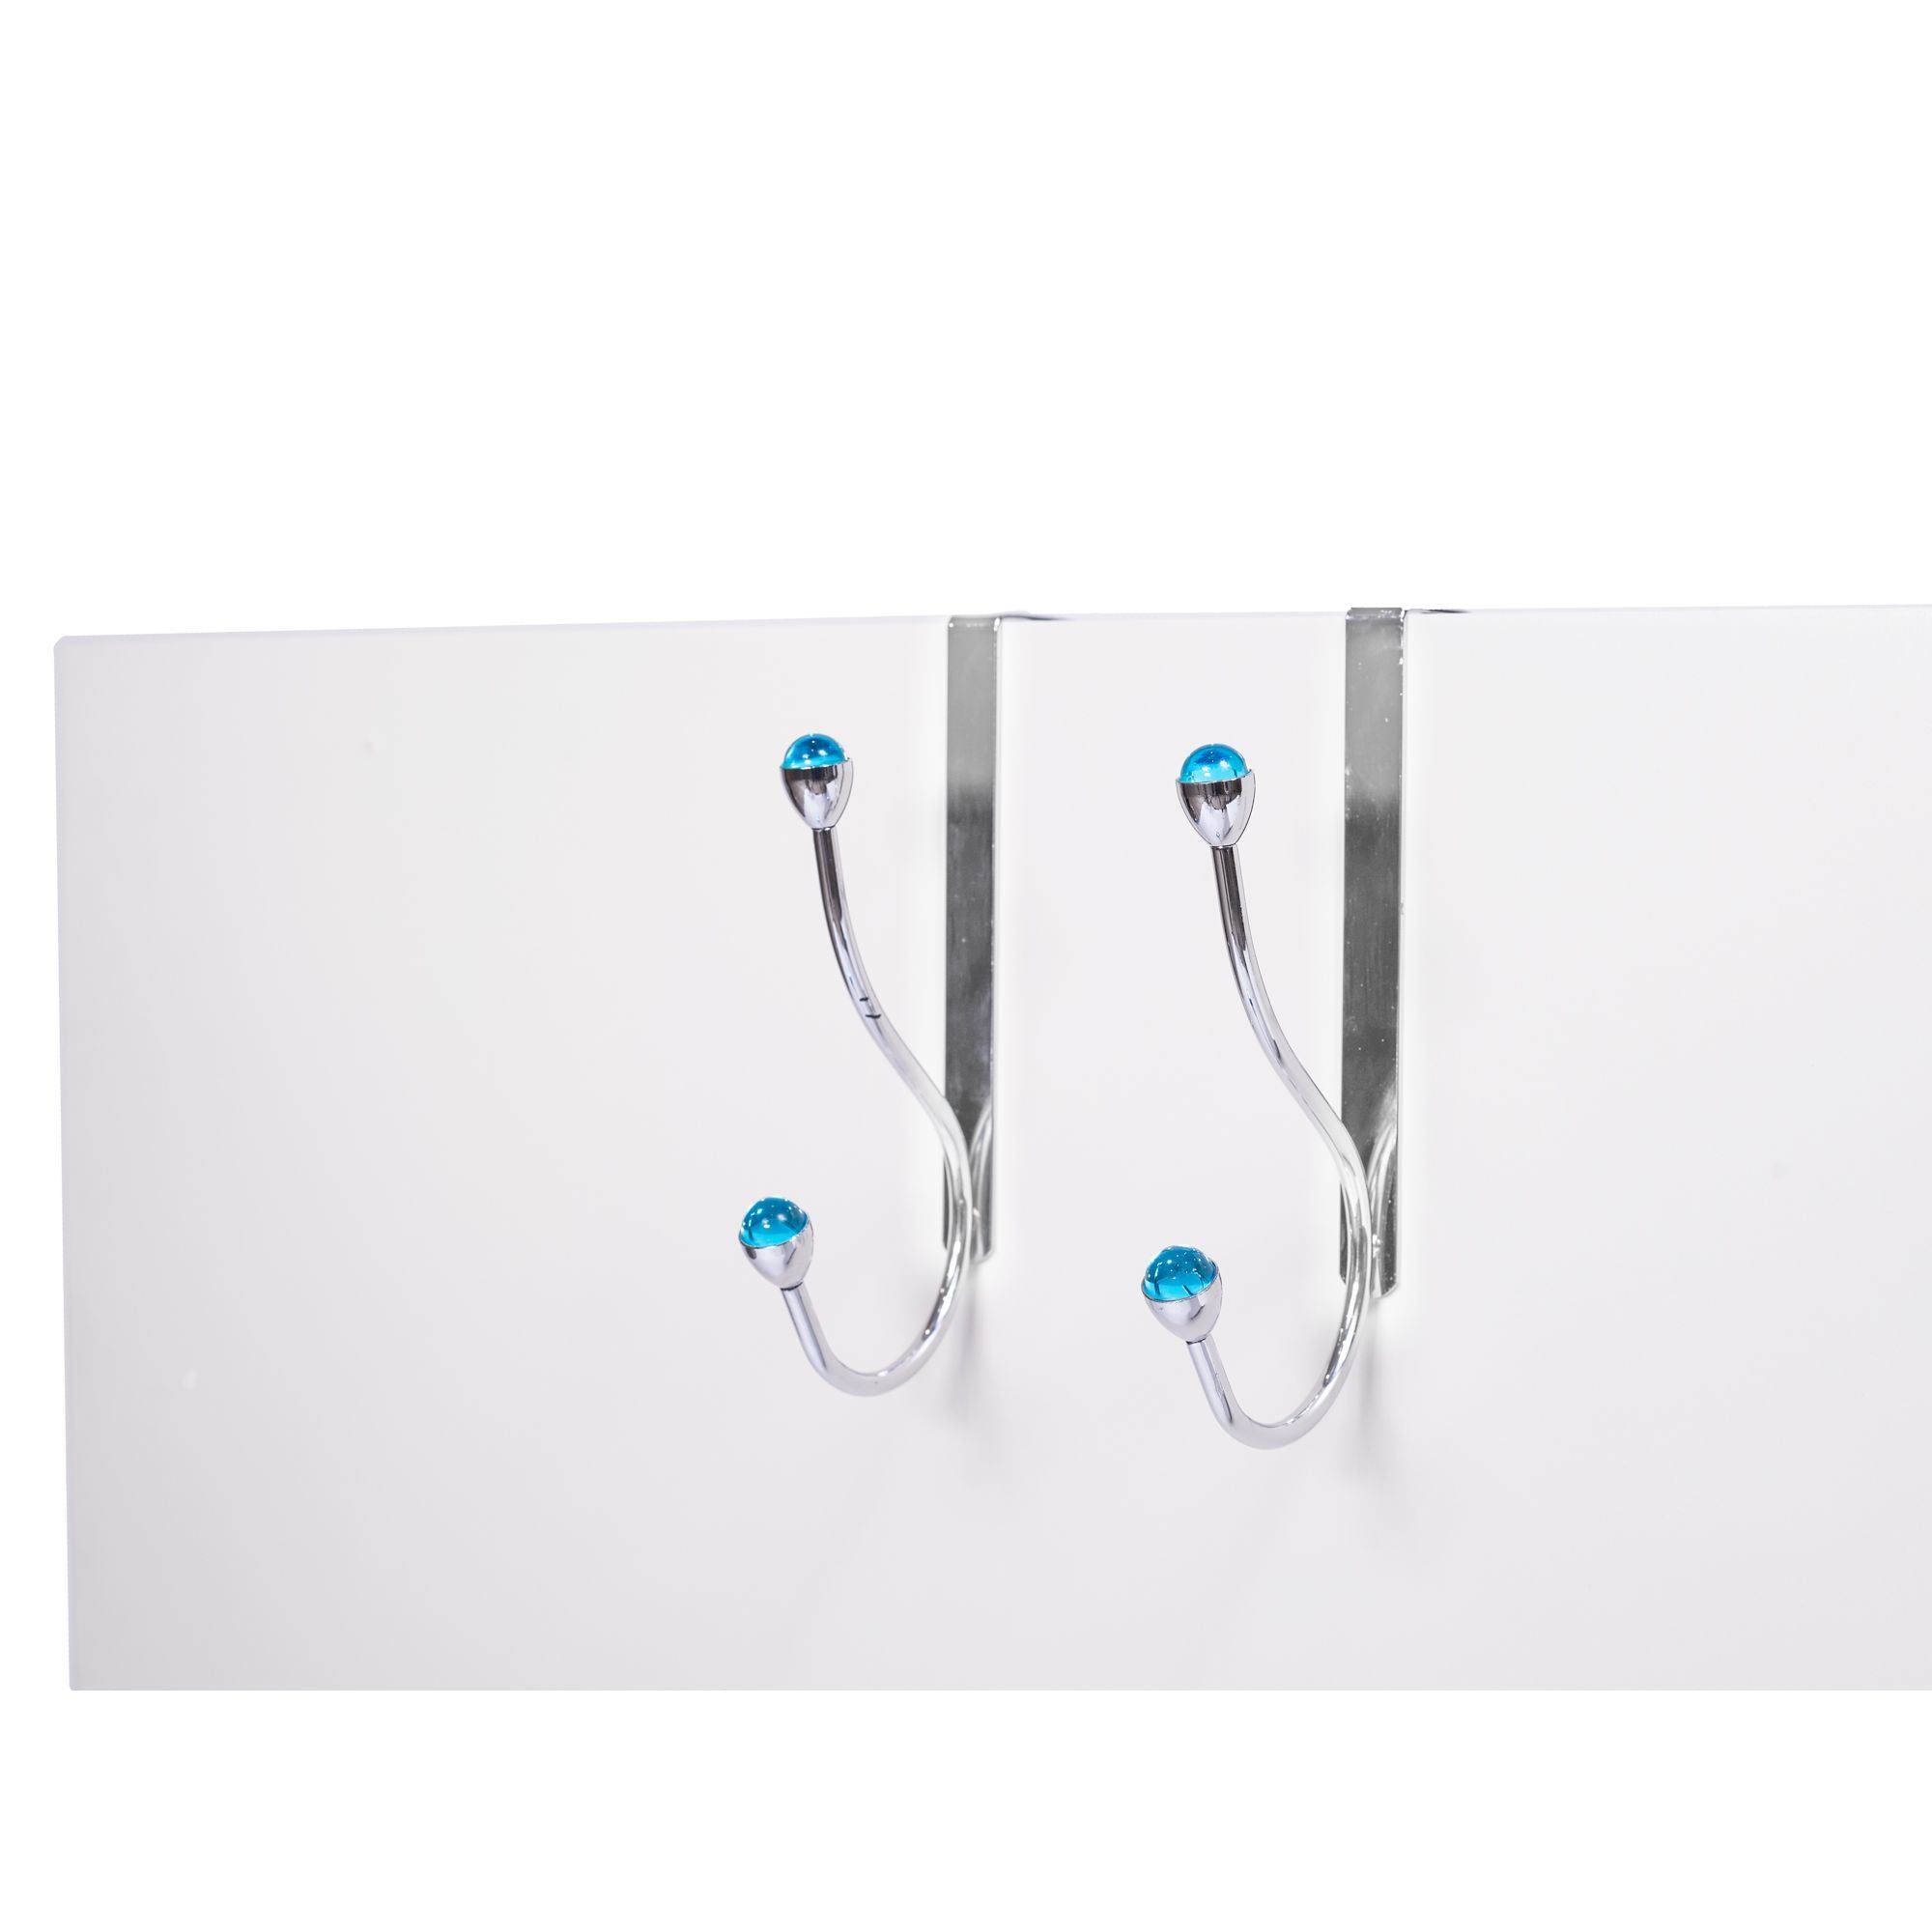 Teamson Home Set of 2 Over-the-Door Hangers with 2 Blue Acrylic Jewel Hooks, Chrome